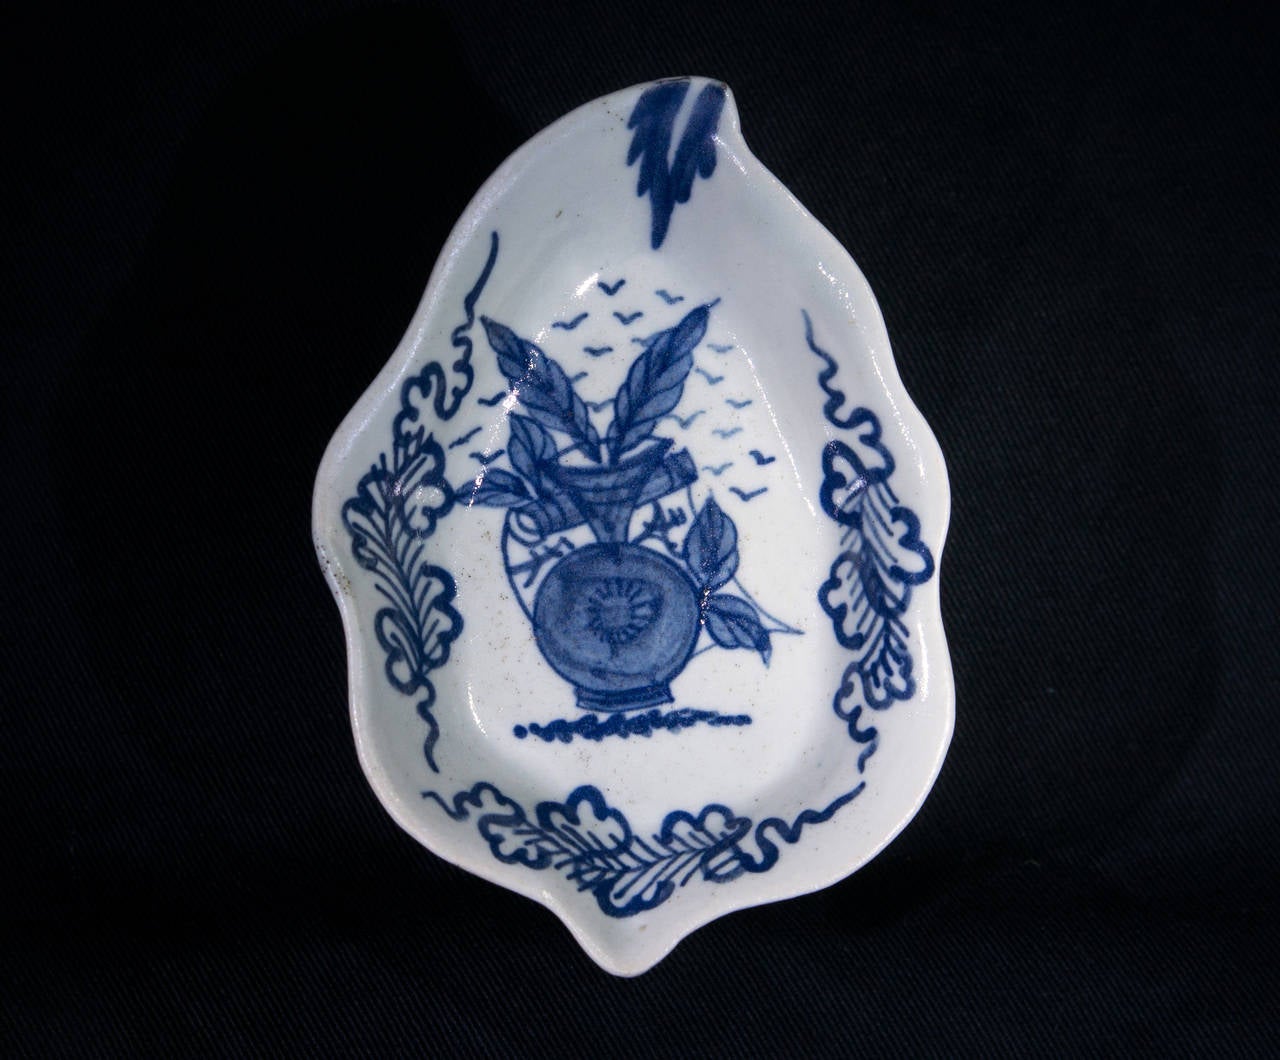 Chinoiserie Limehouse Pickle Dish, Leaf Form with Vase & Scroll, circa 1747